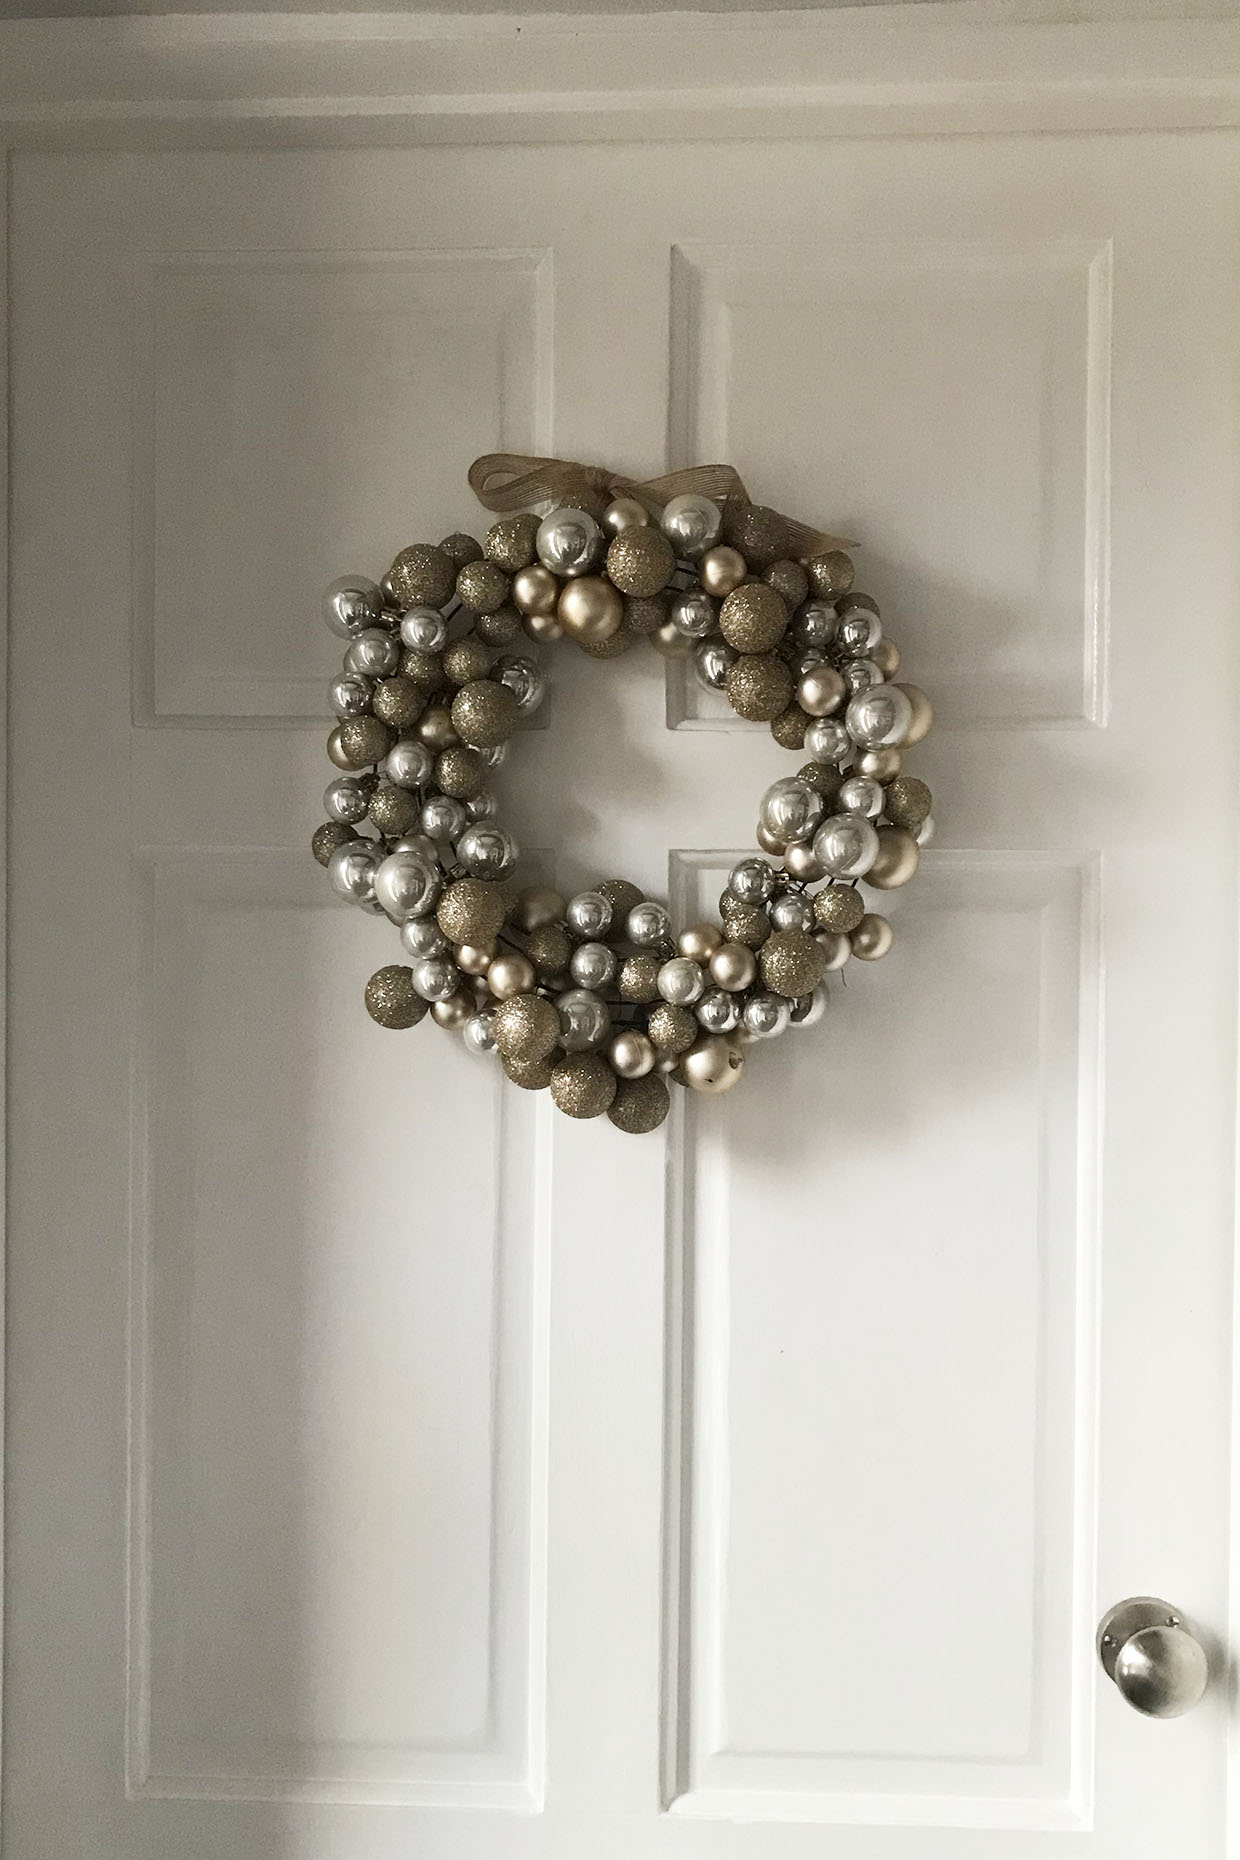 How to make a bauble wreath tutorial